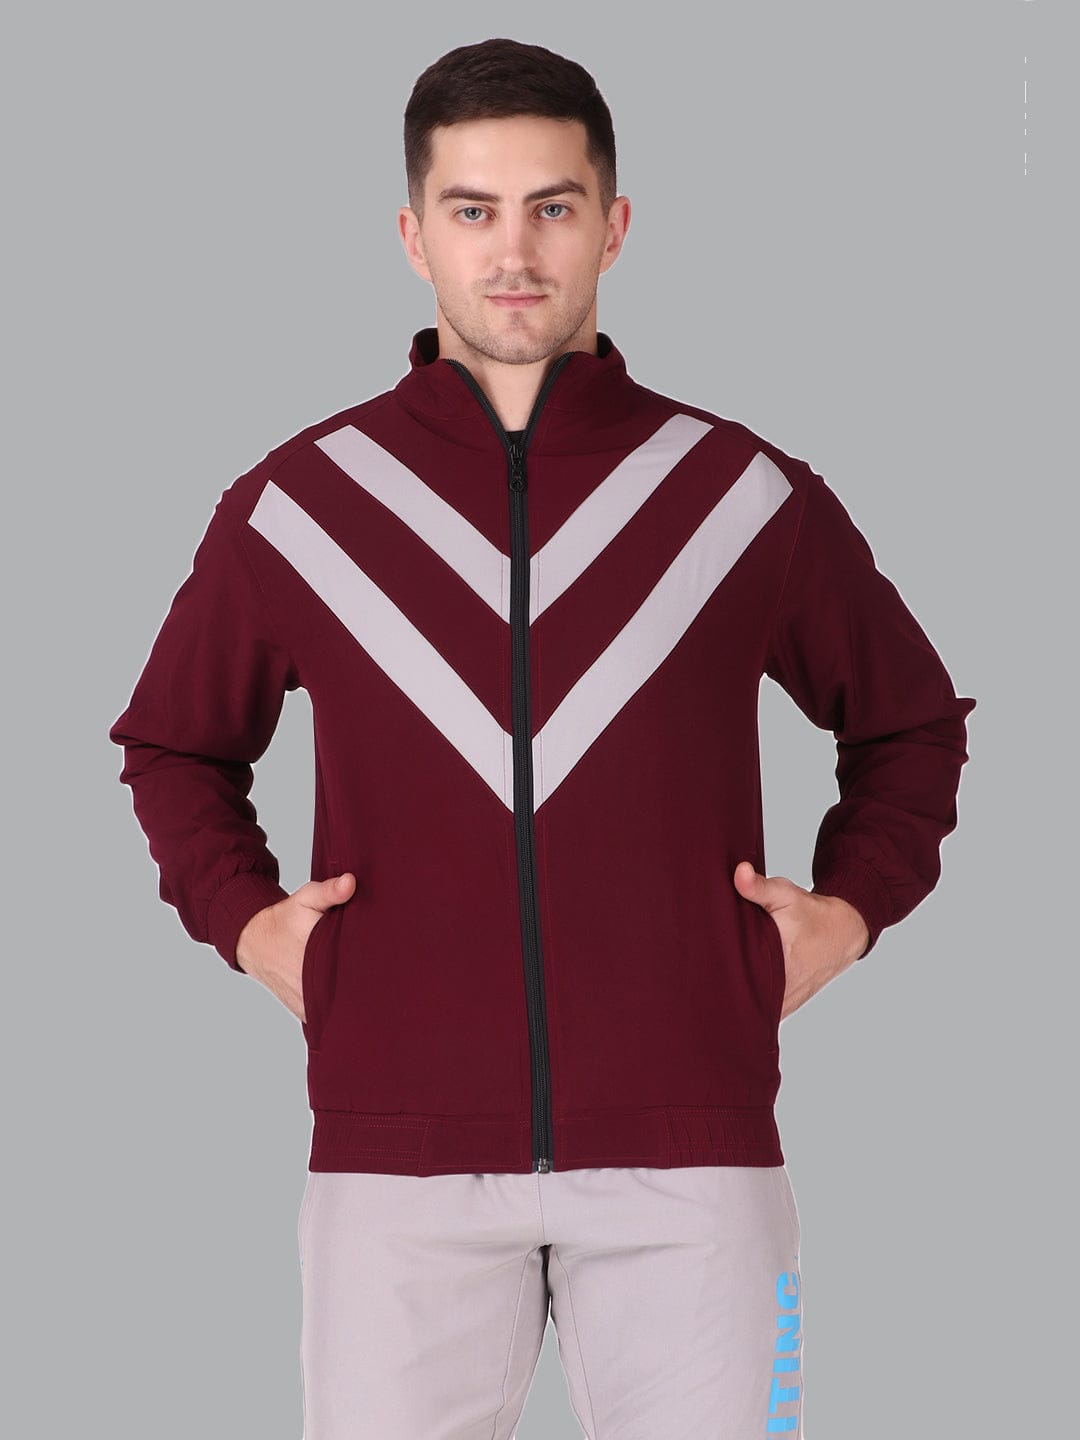 Fitinc Sports & Casual Wine Jacket for Men with Zipper Pockets